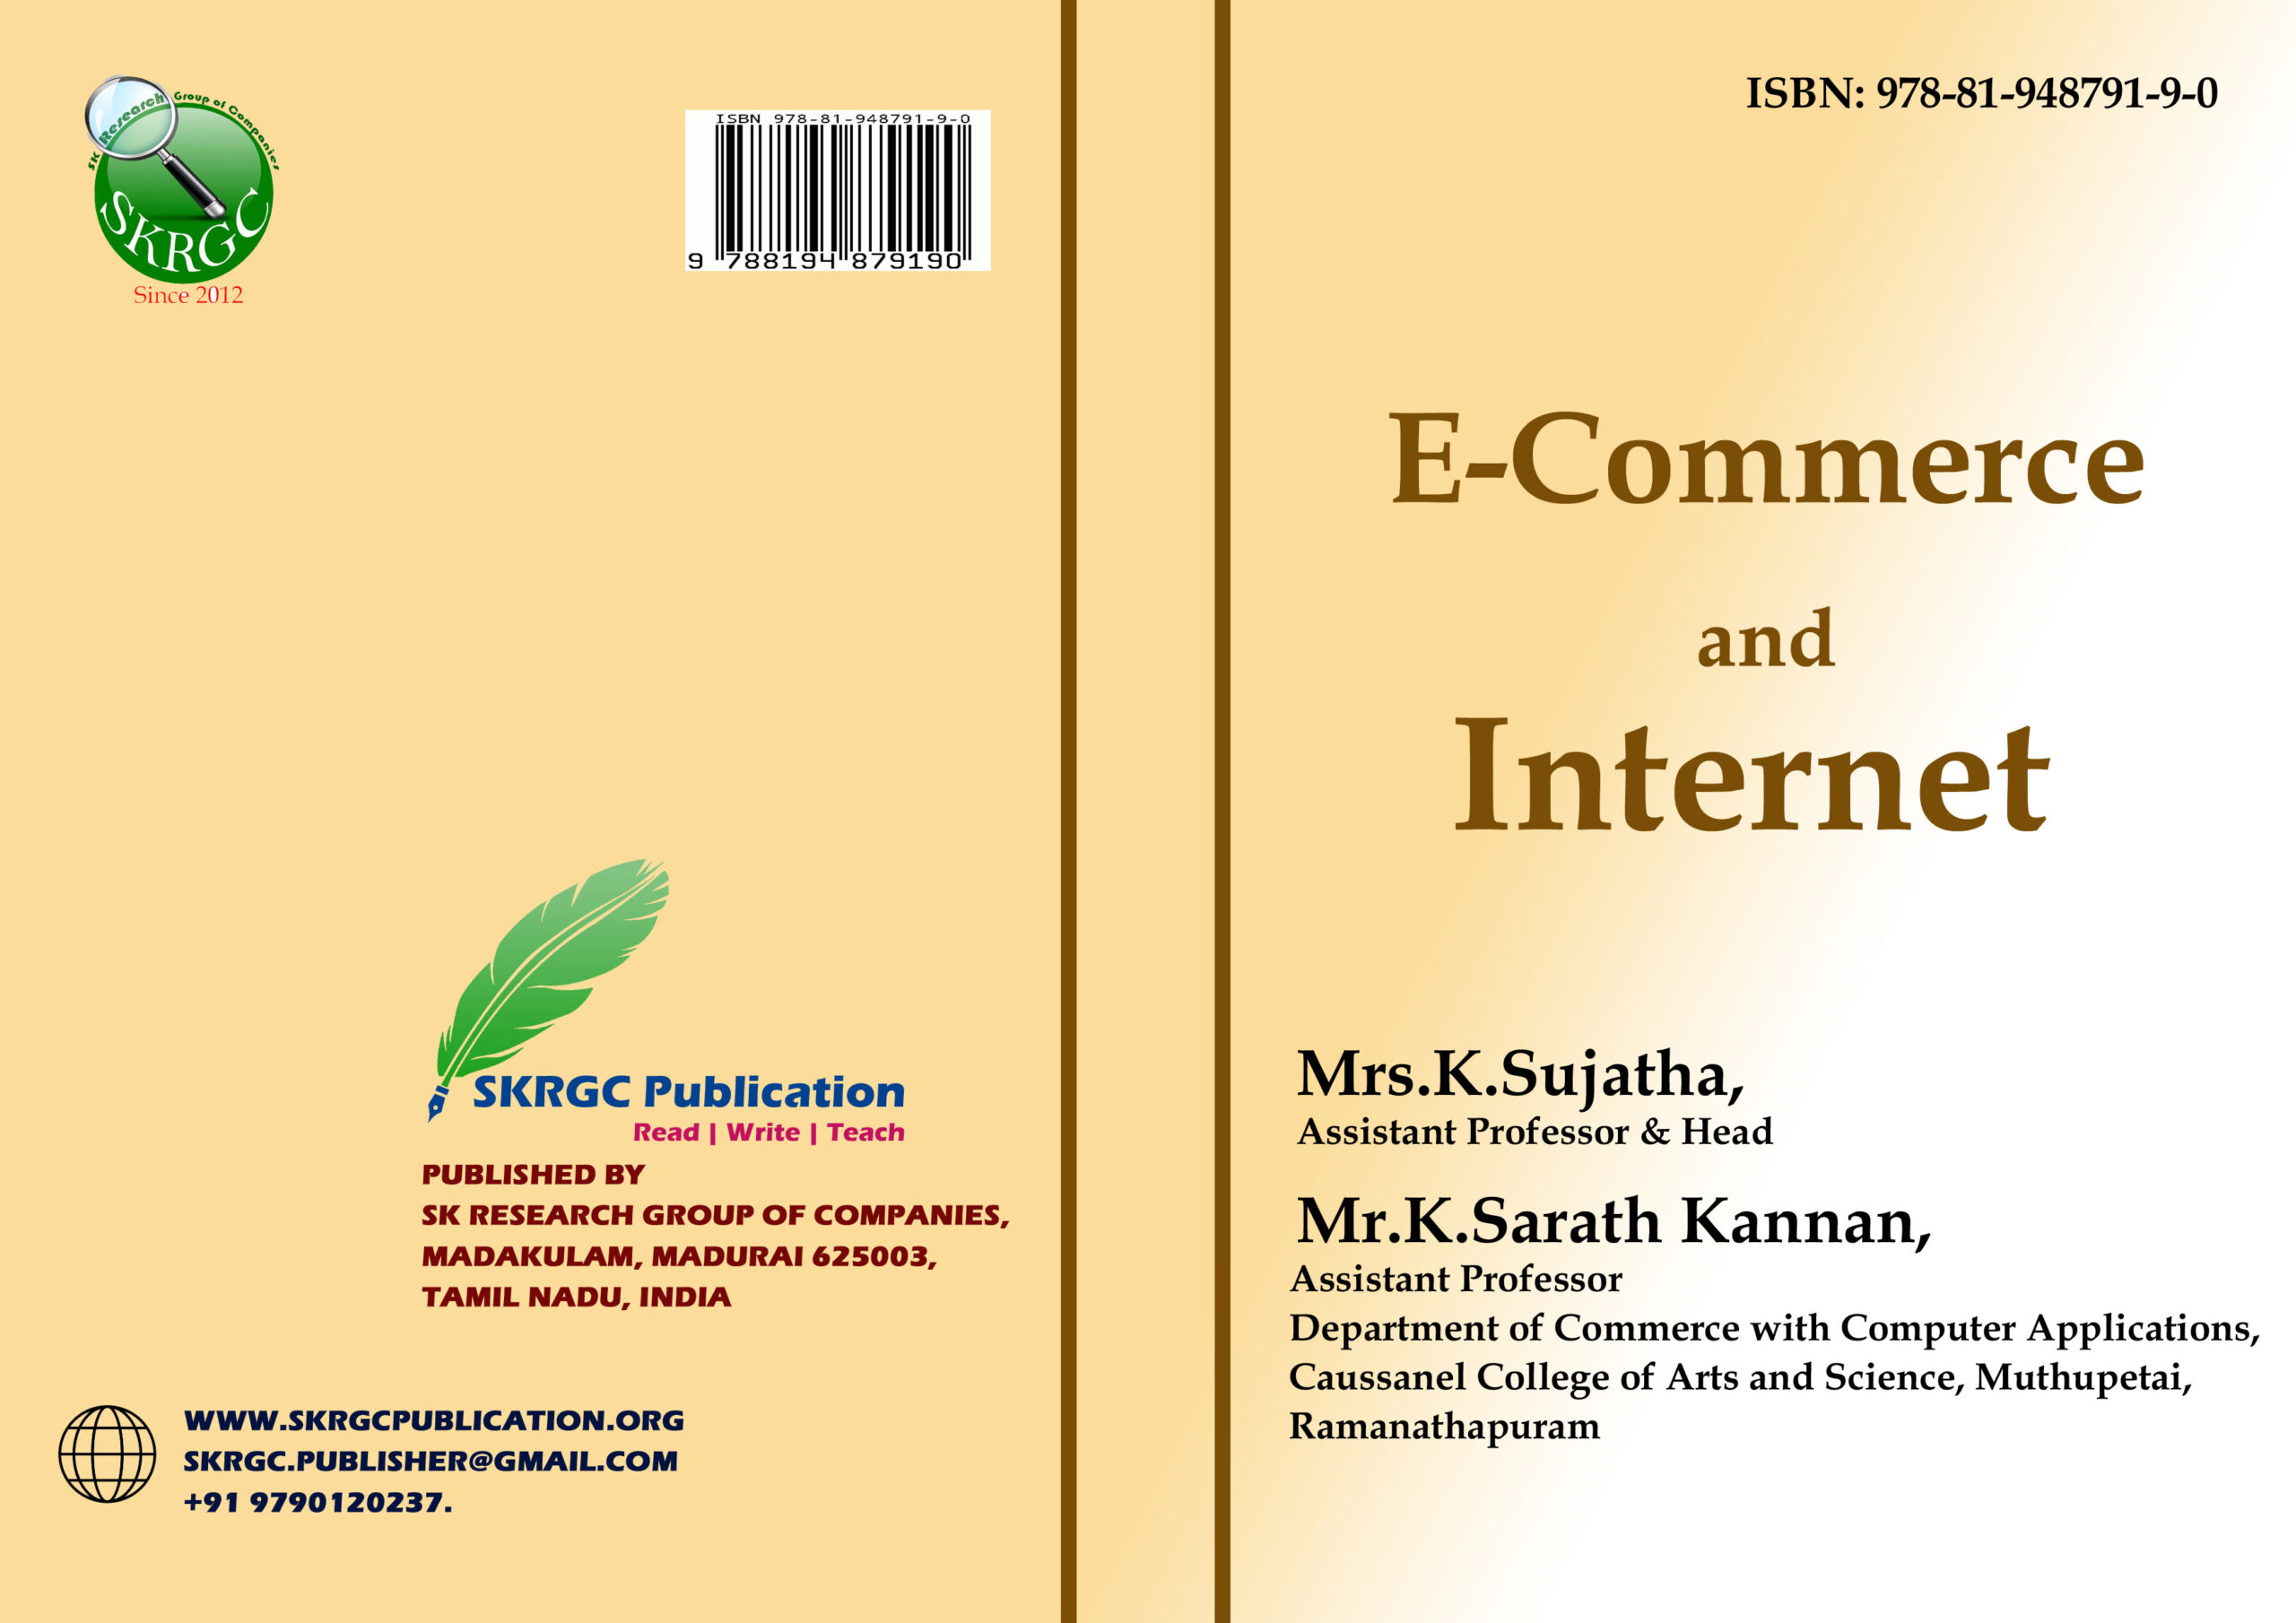 E-Commerce and Internet